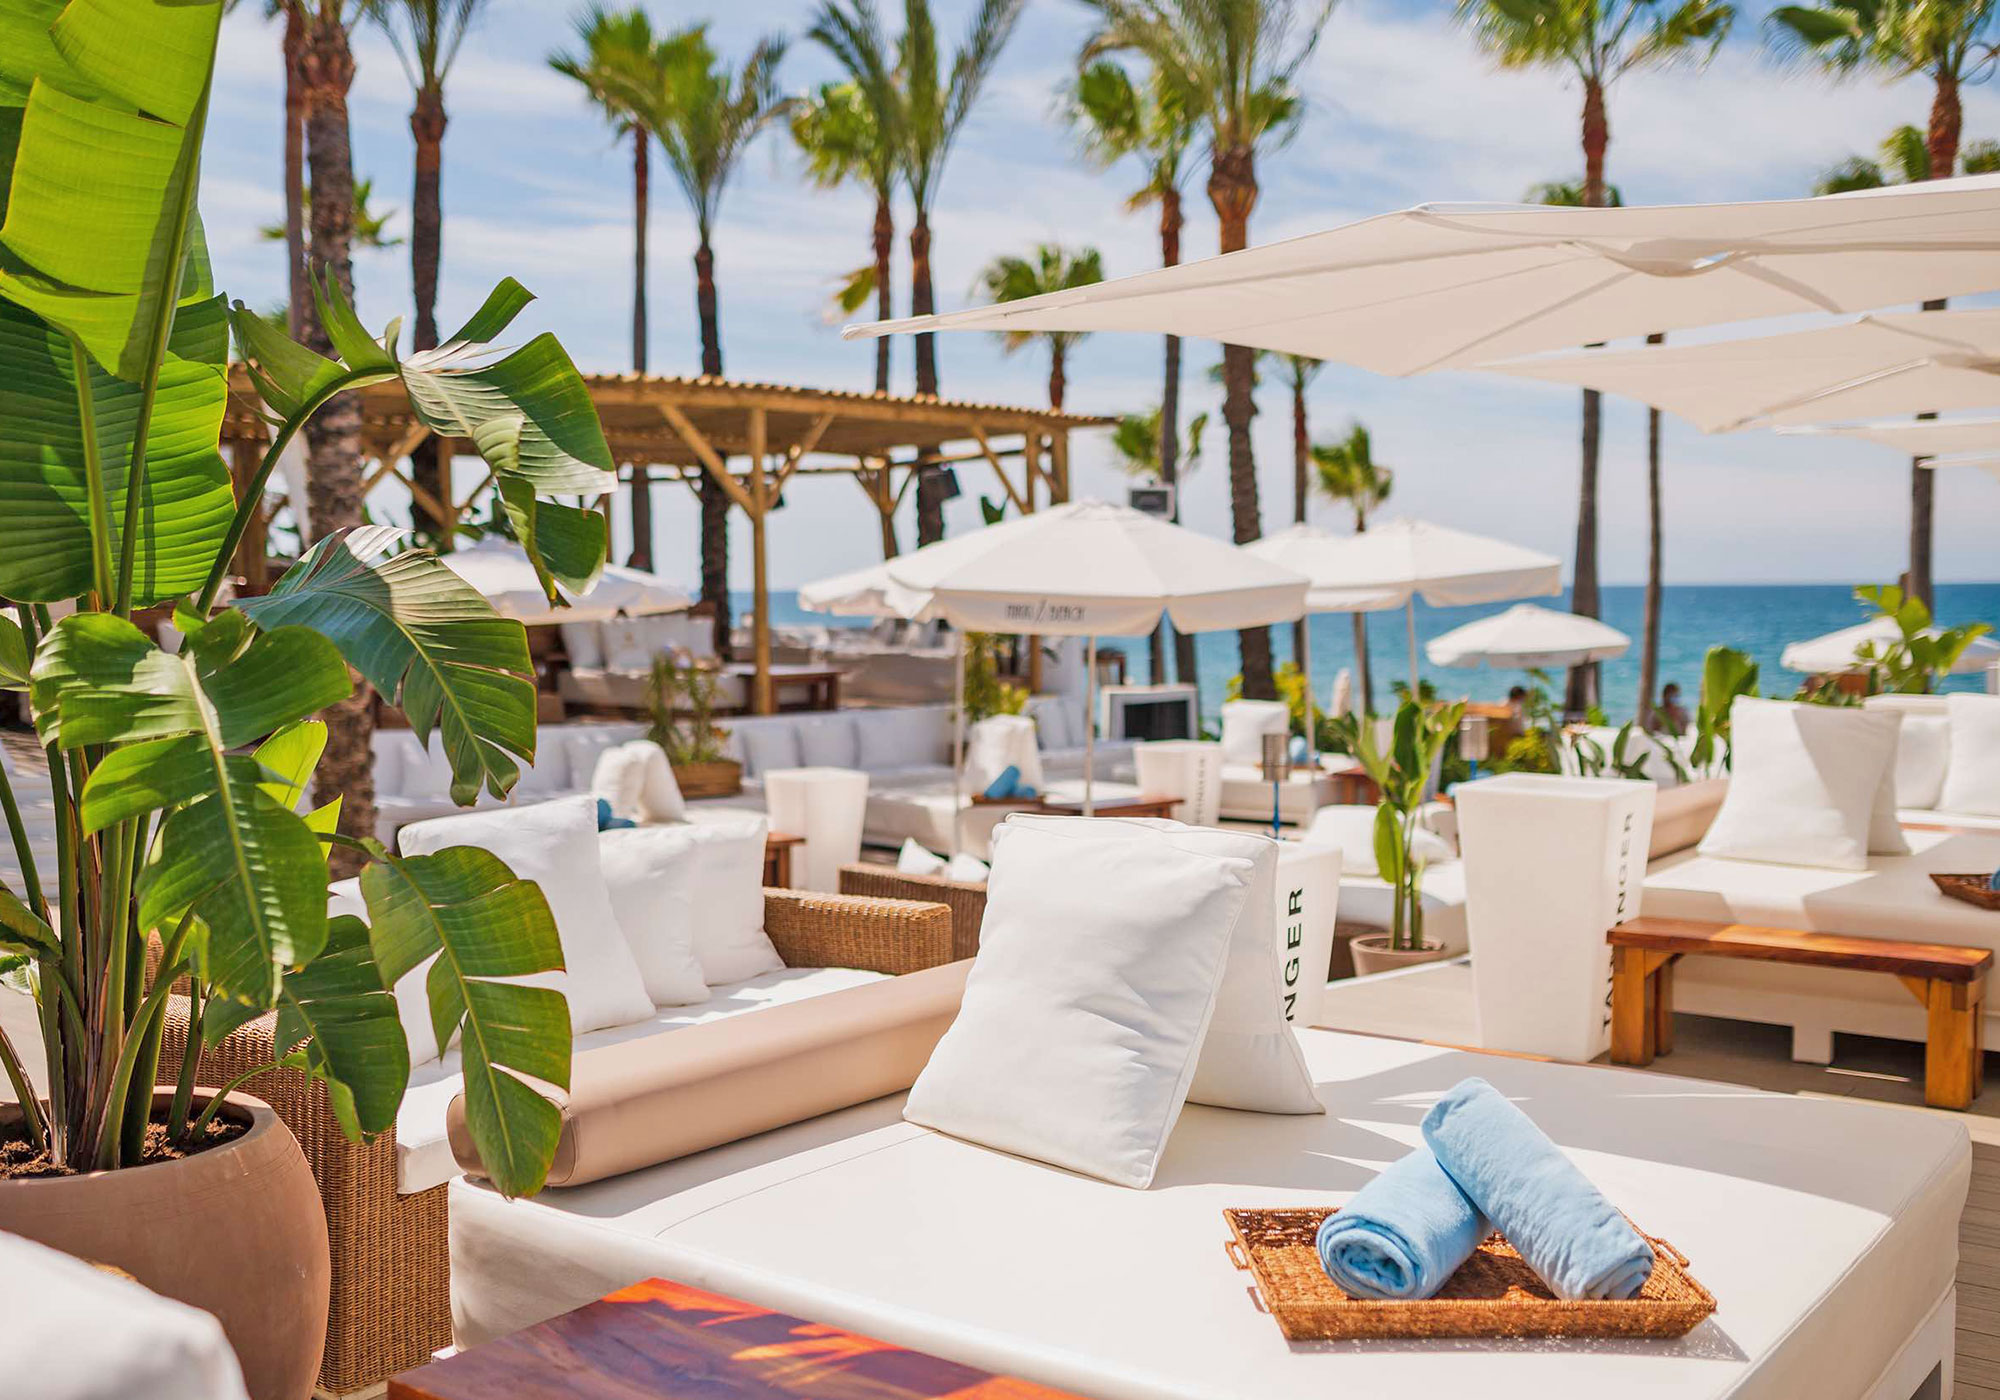 Seafront dining in Marbella La Sala by The Sea beach club and restaurant in Puerto  Banus, Marbella